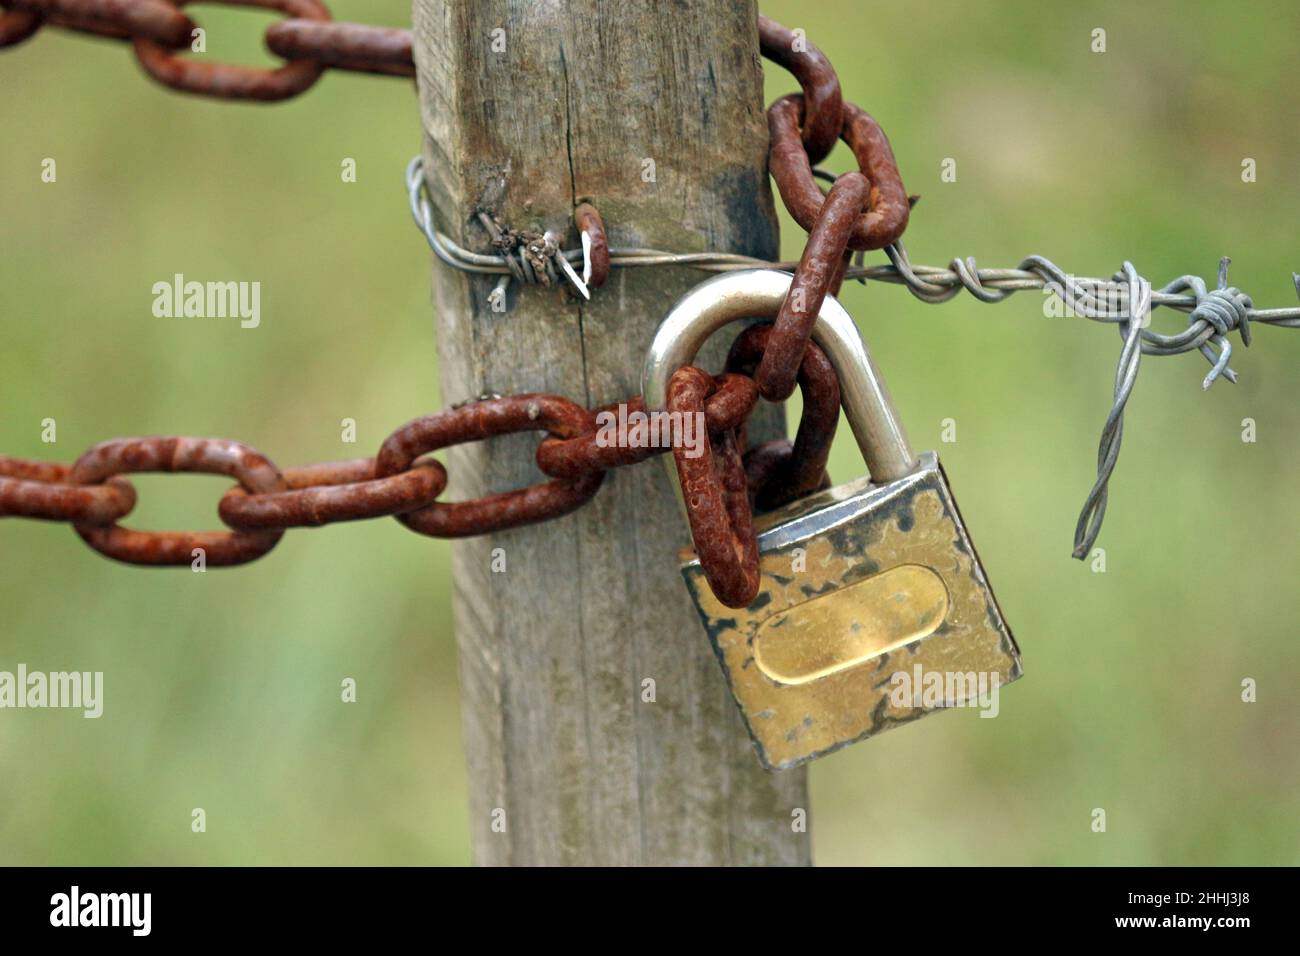 A small wooden pole suspended by barbed wire, a rusty chain and a small padlock. In the simple life of the countryside there are no walls. Stock Photo